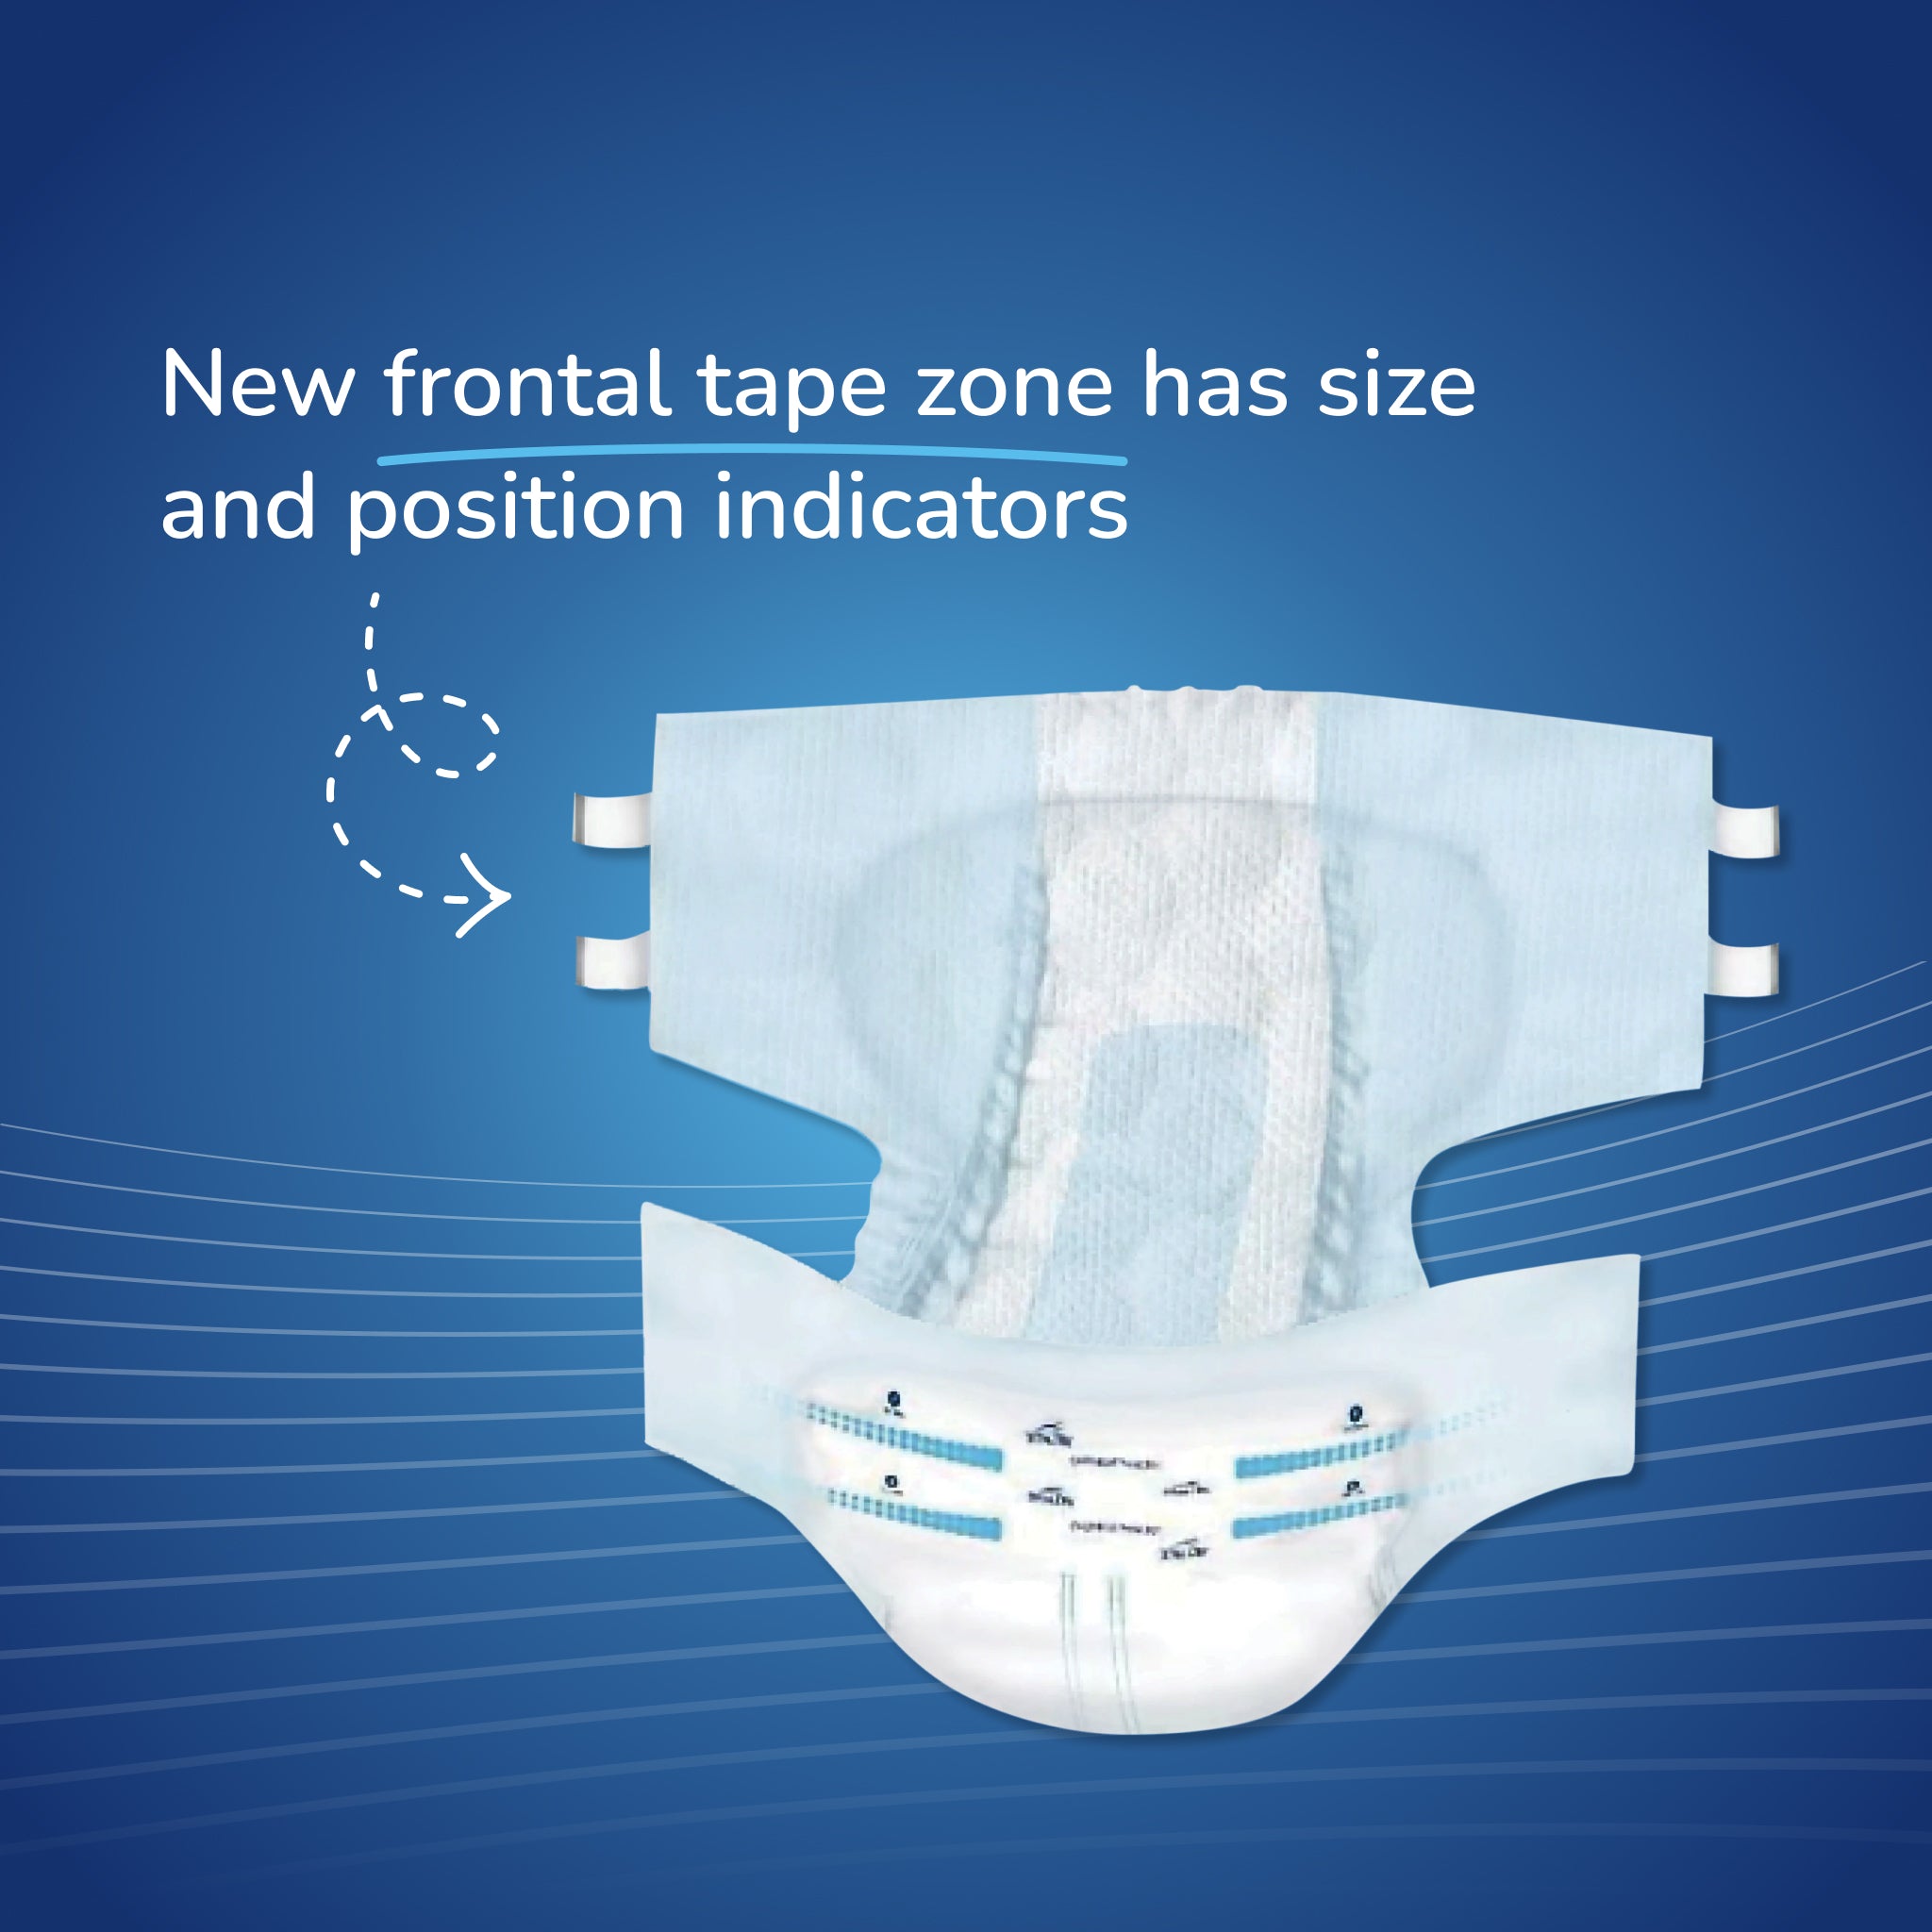 Buy TotalDry Brief Liner For moderate bladder leakage